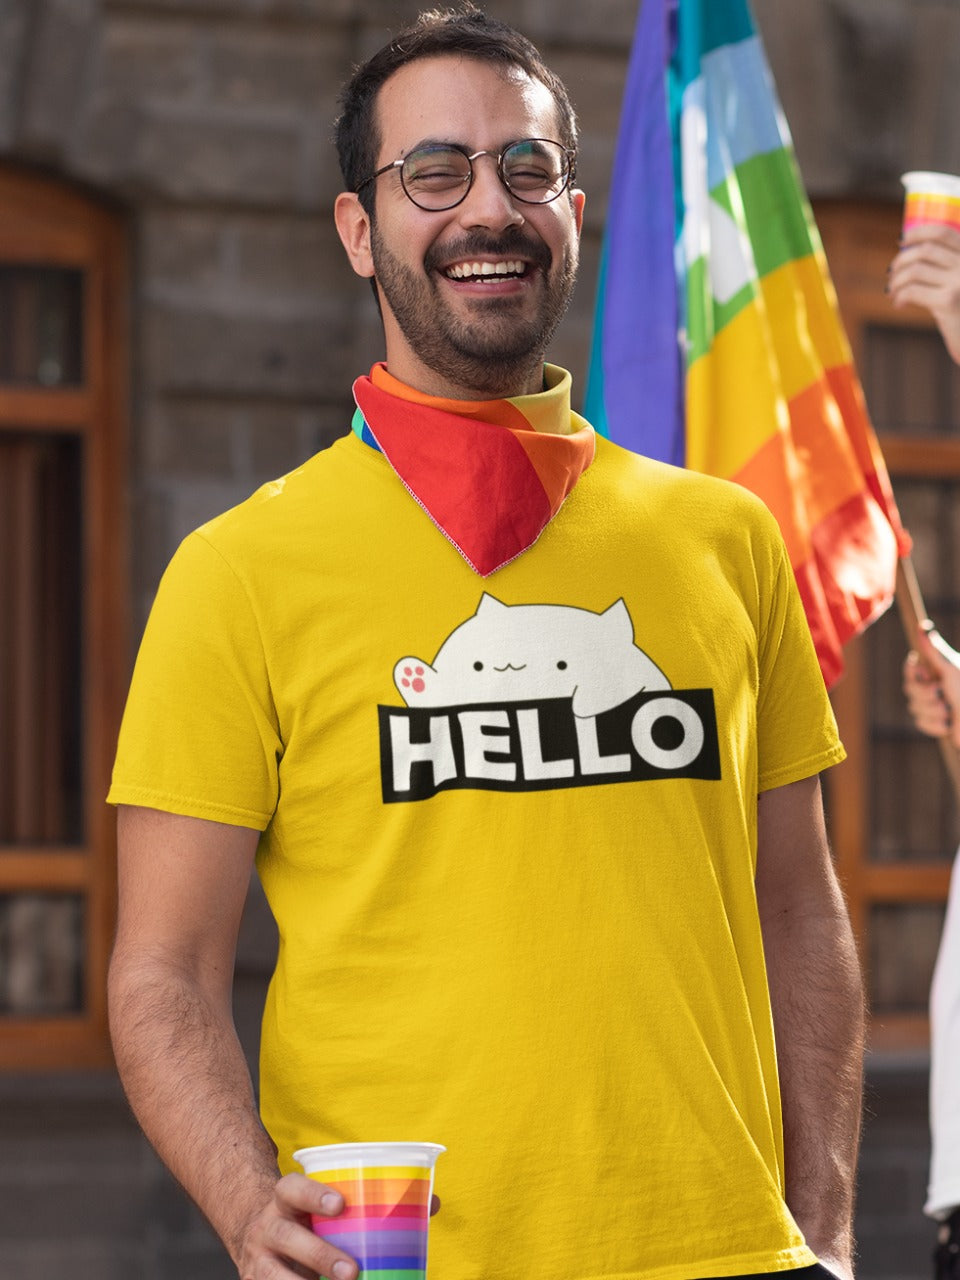 smiling man with spectacles wearing yellow tshirt with bongo cat saying hello written on it. The man has a rainbow pride cup in his hand and a rainbow lgbtq bandana. There is a rainbow pride flag in the background